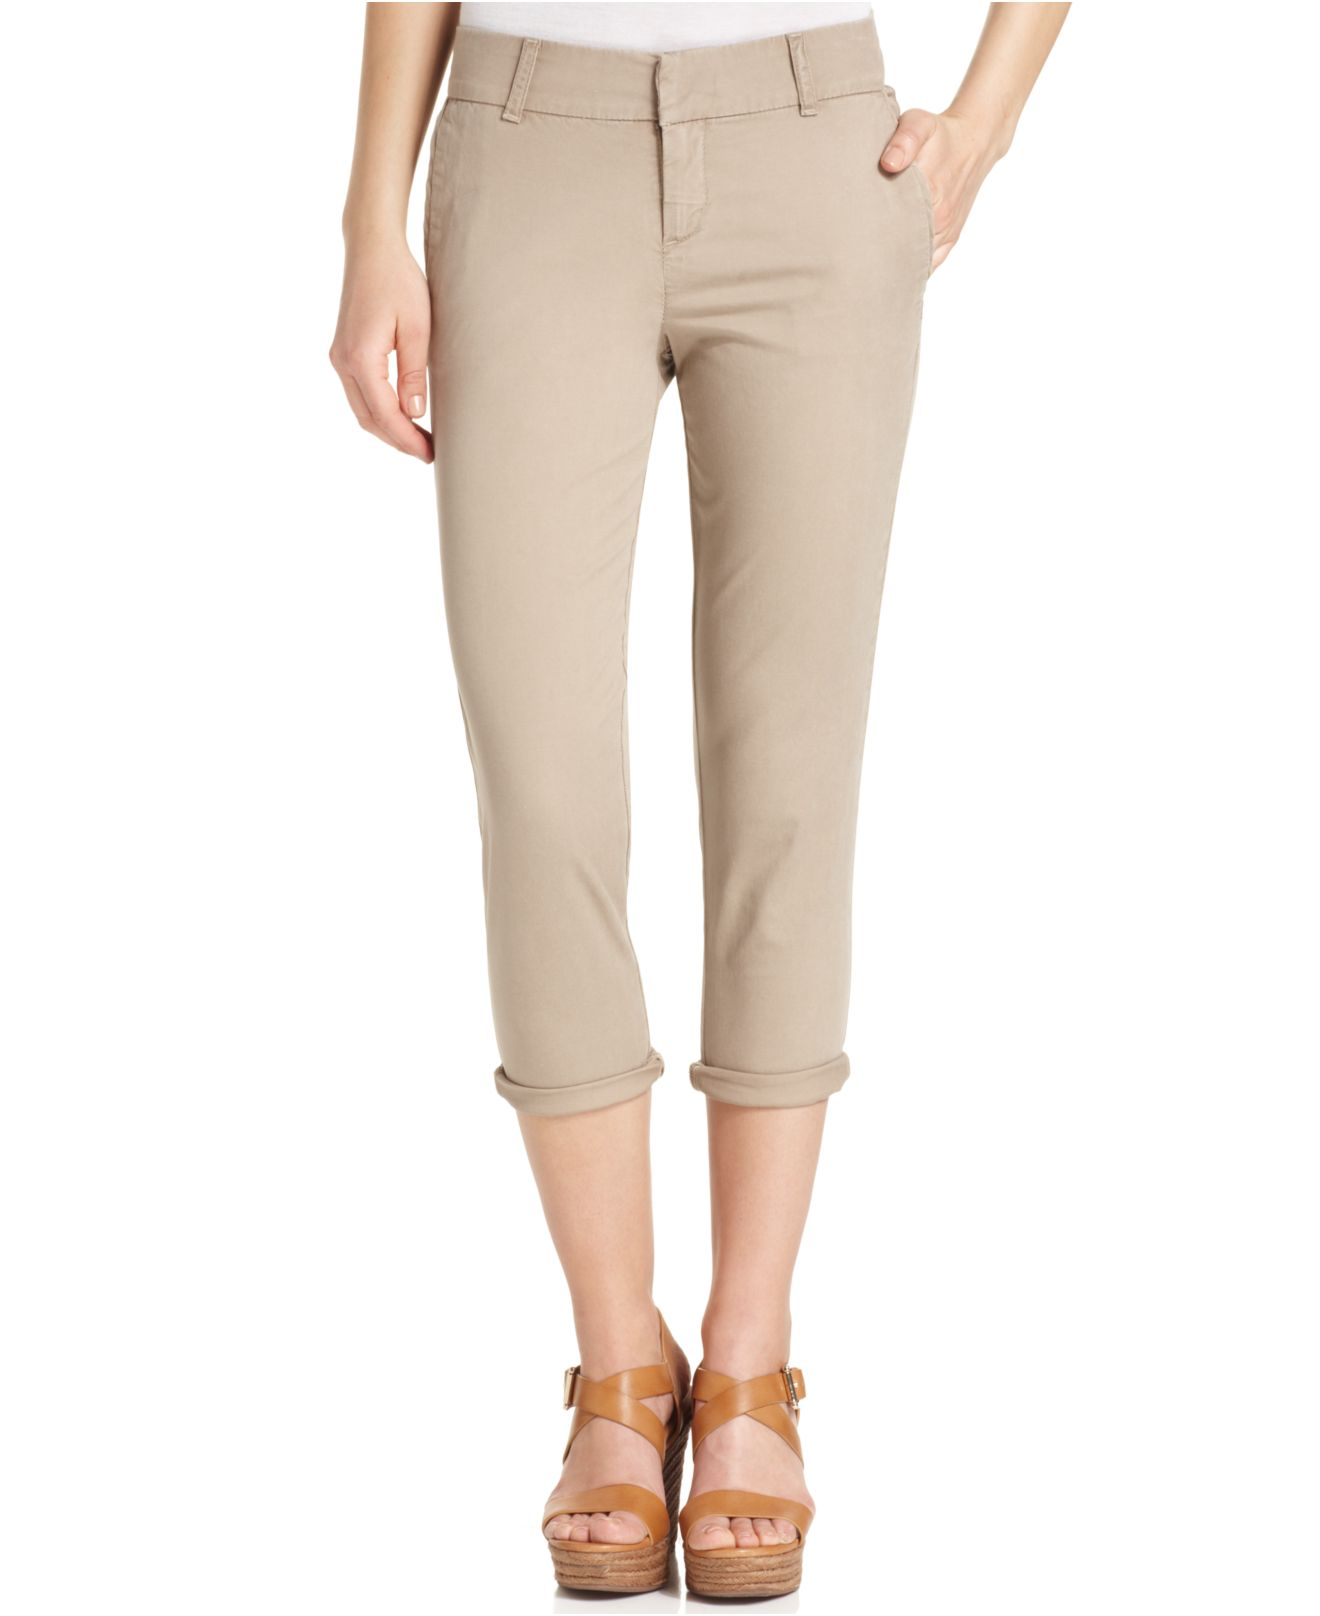 Lyst - Kut From The Kloth Skinnyleg Cropped Cuffed Pants in Natural